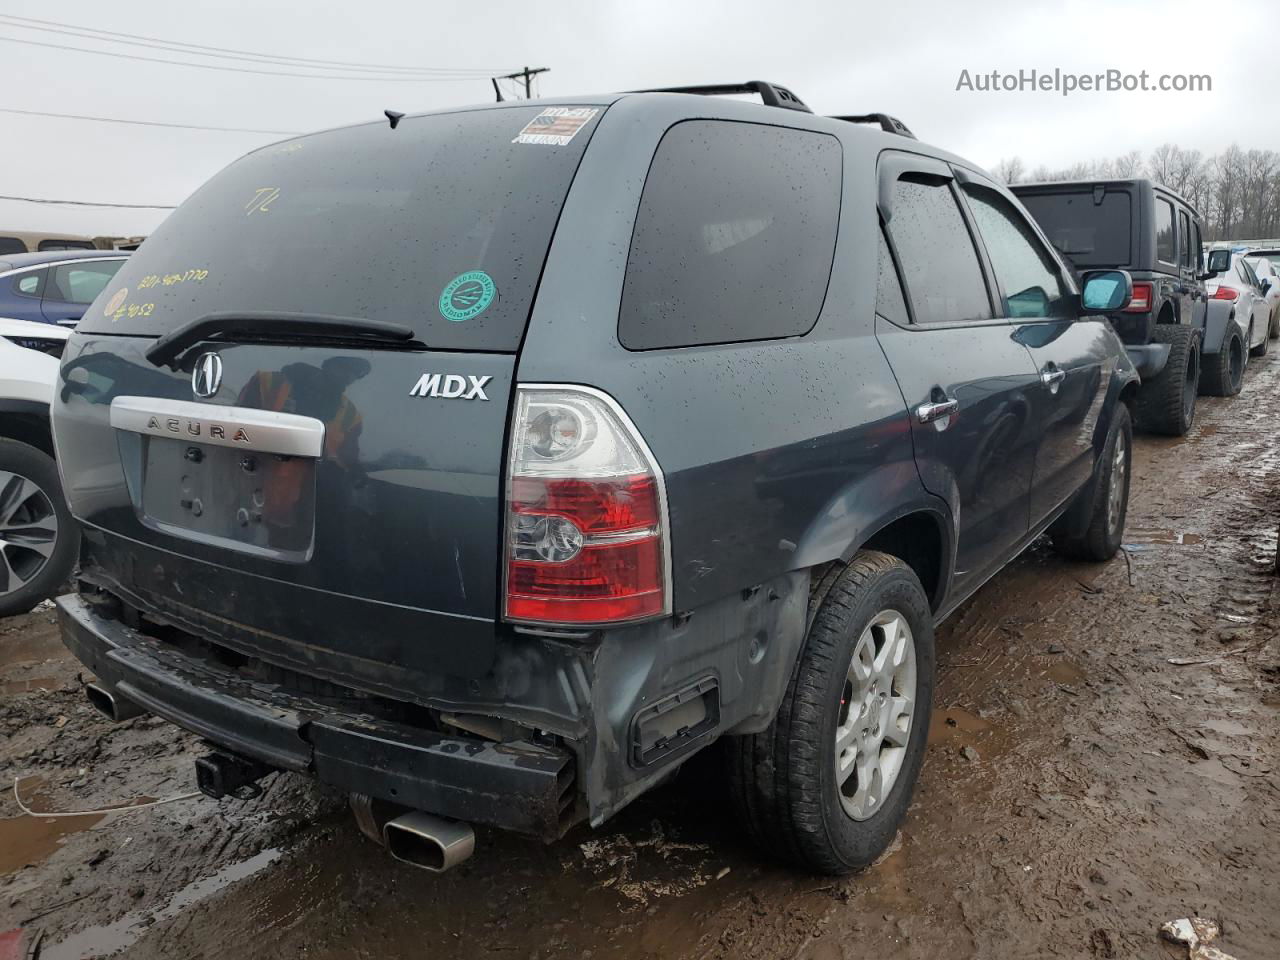 2005 Acura Mdx Touring Charcoal vin: 2HNYD18825H544052